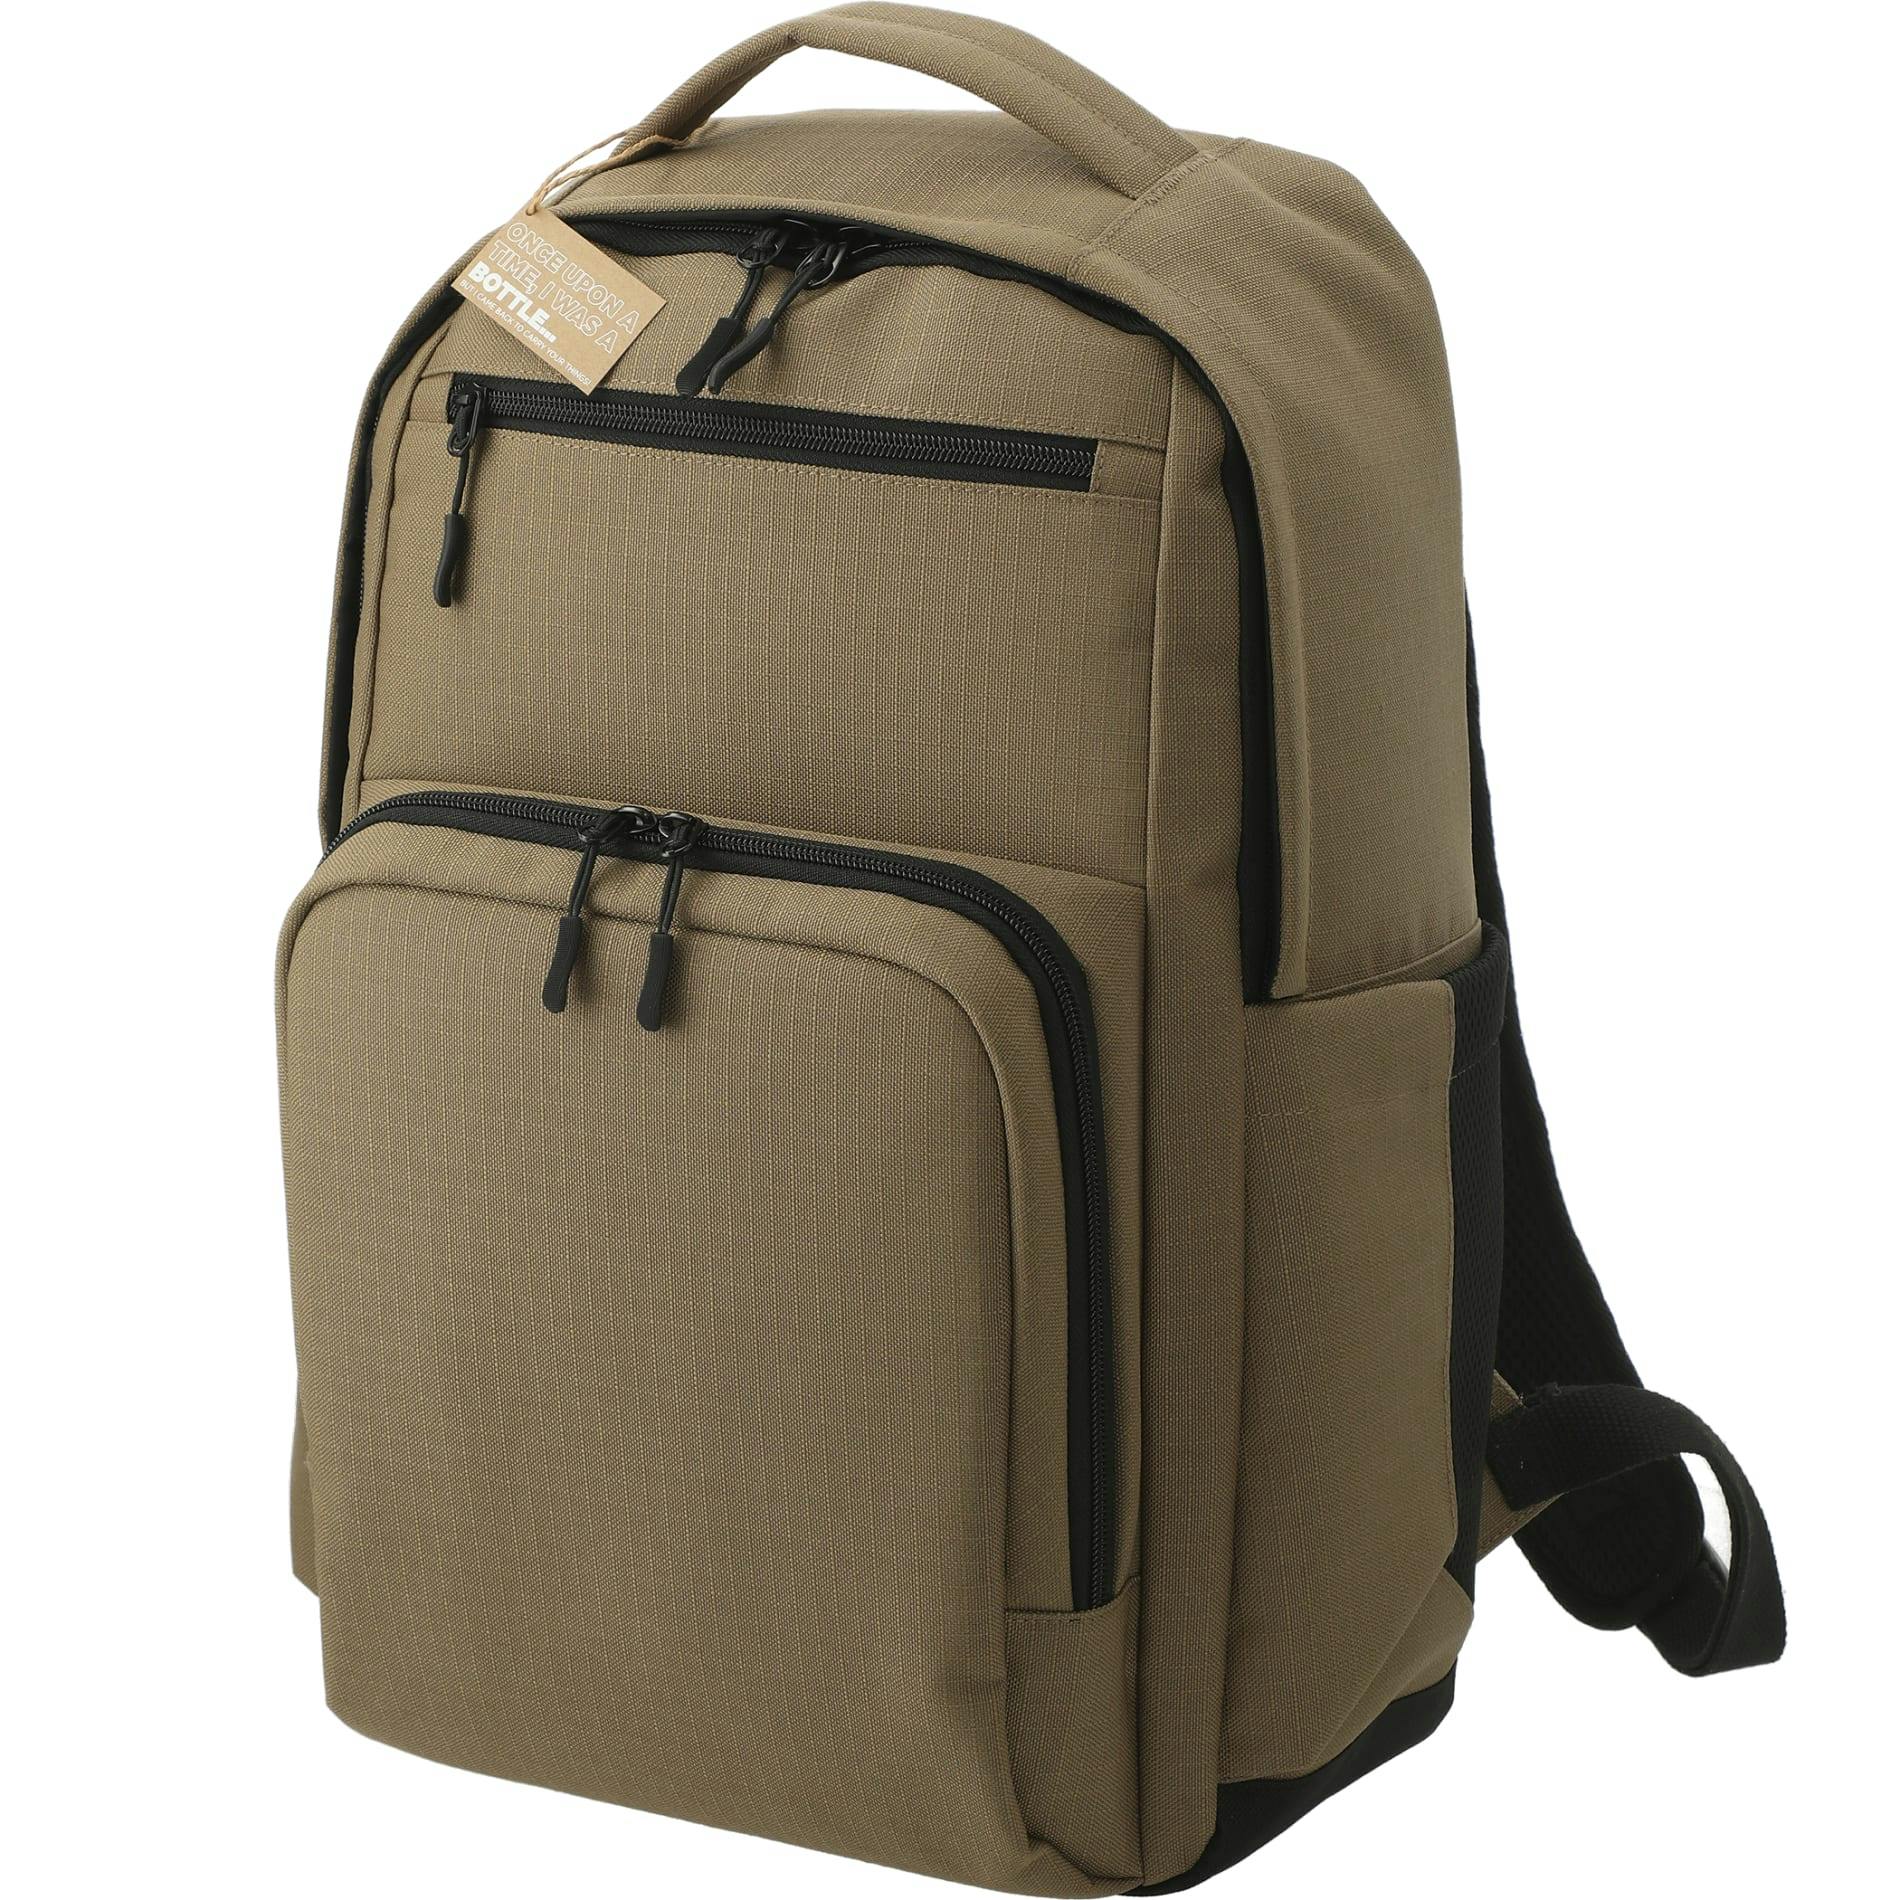 NBN Recycled Utility Insulated Backpack - additional Image 3